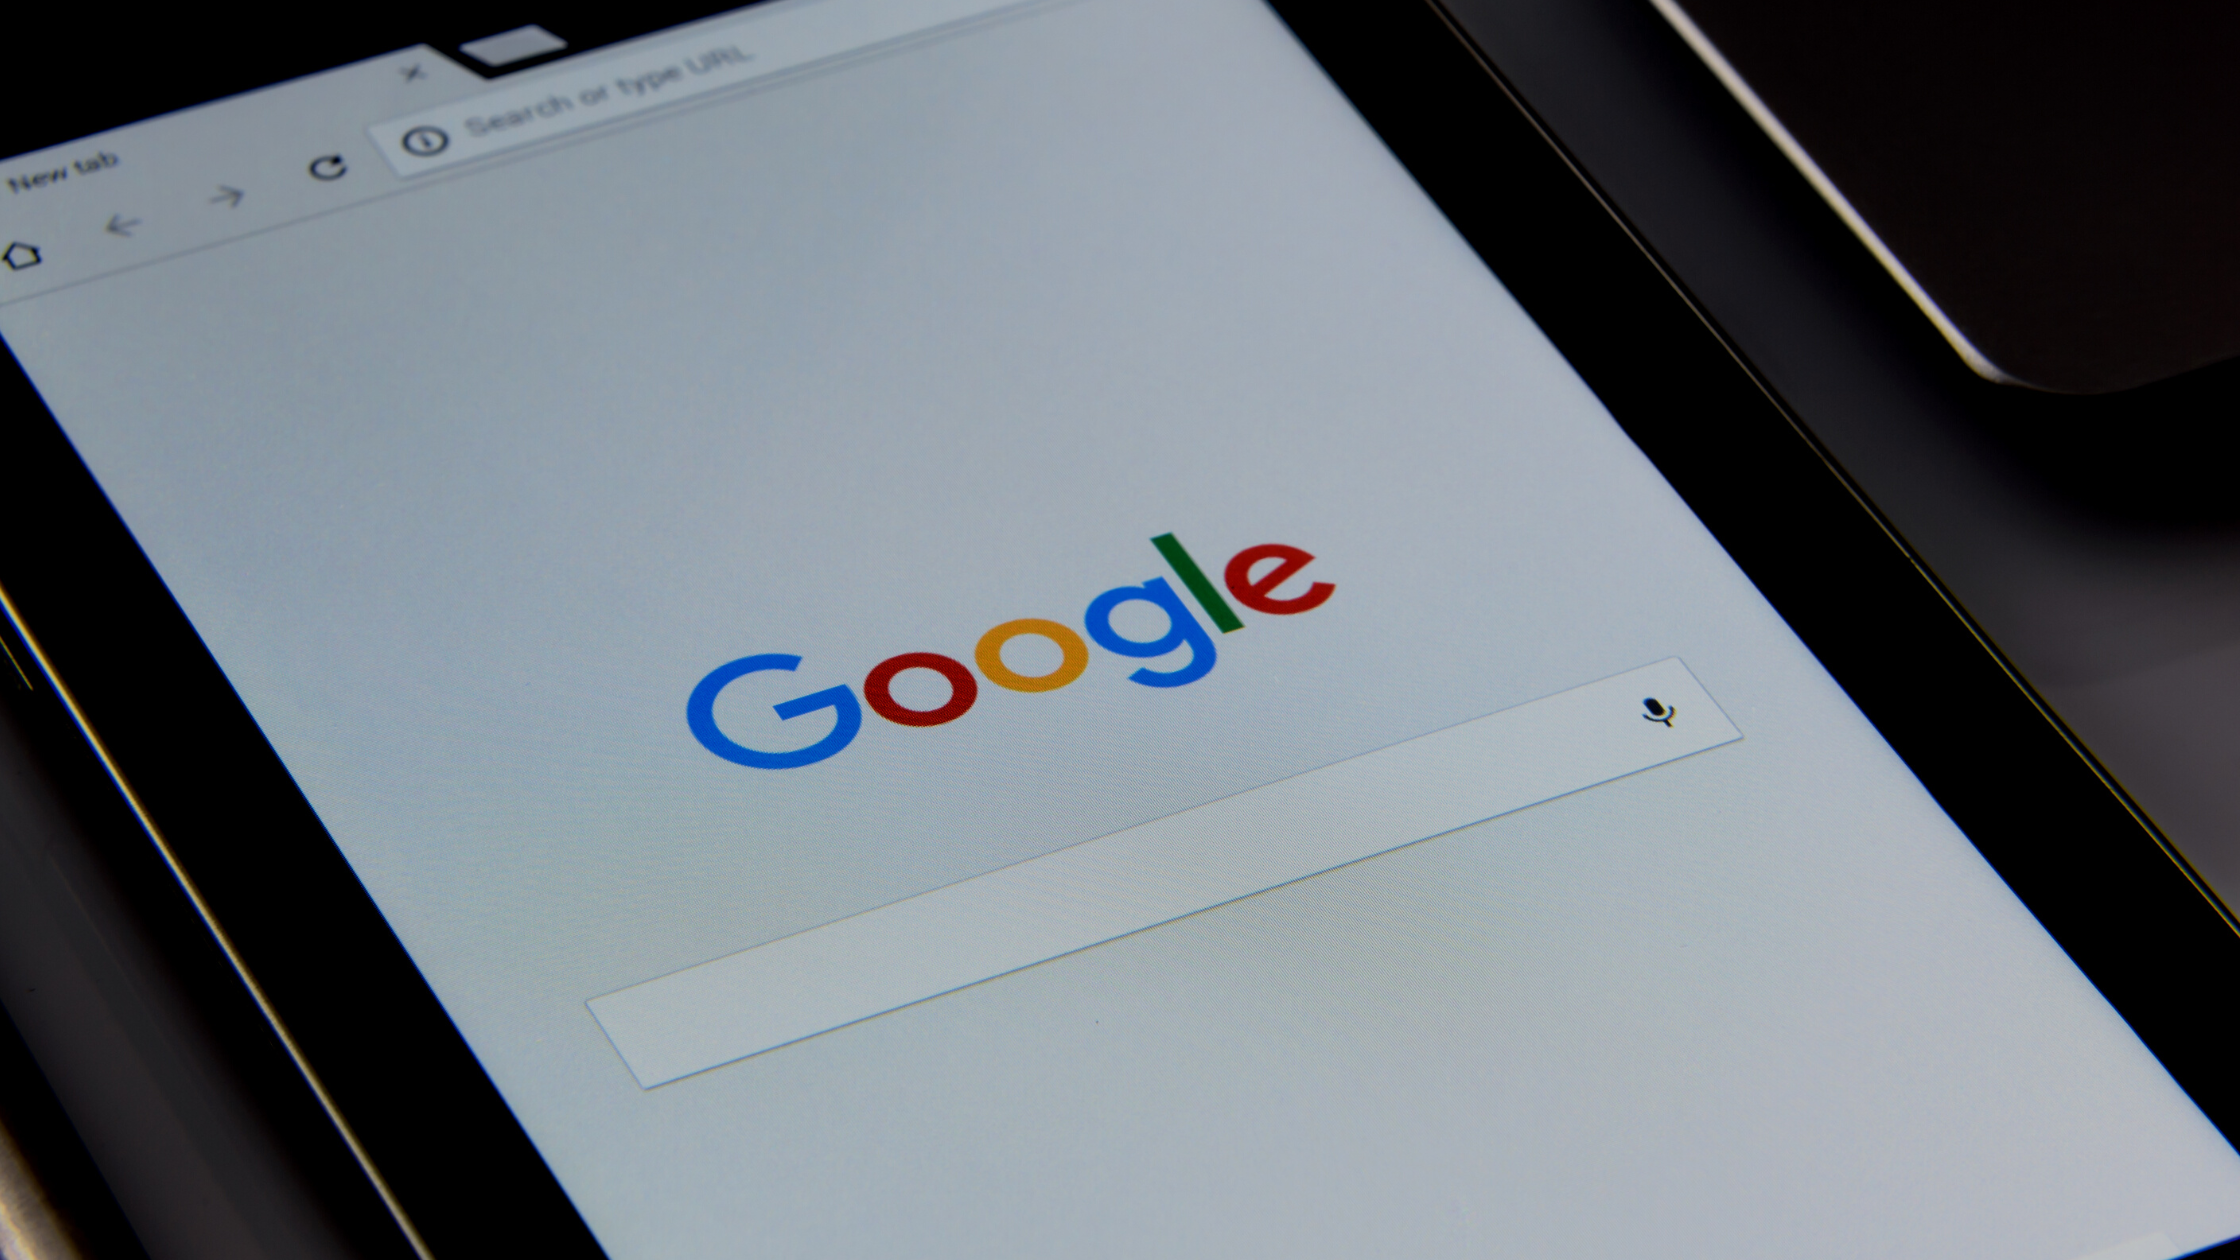 Google Launches the Helpful Content Update